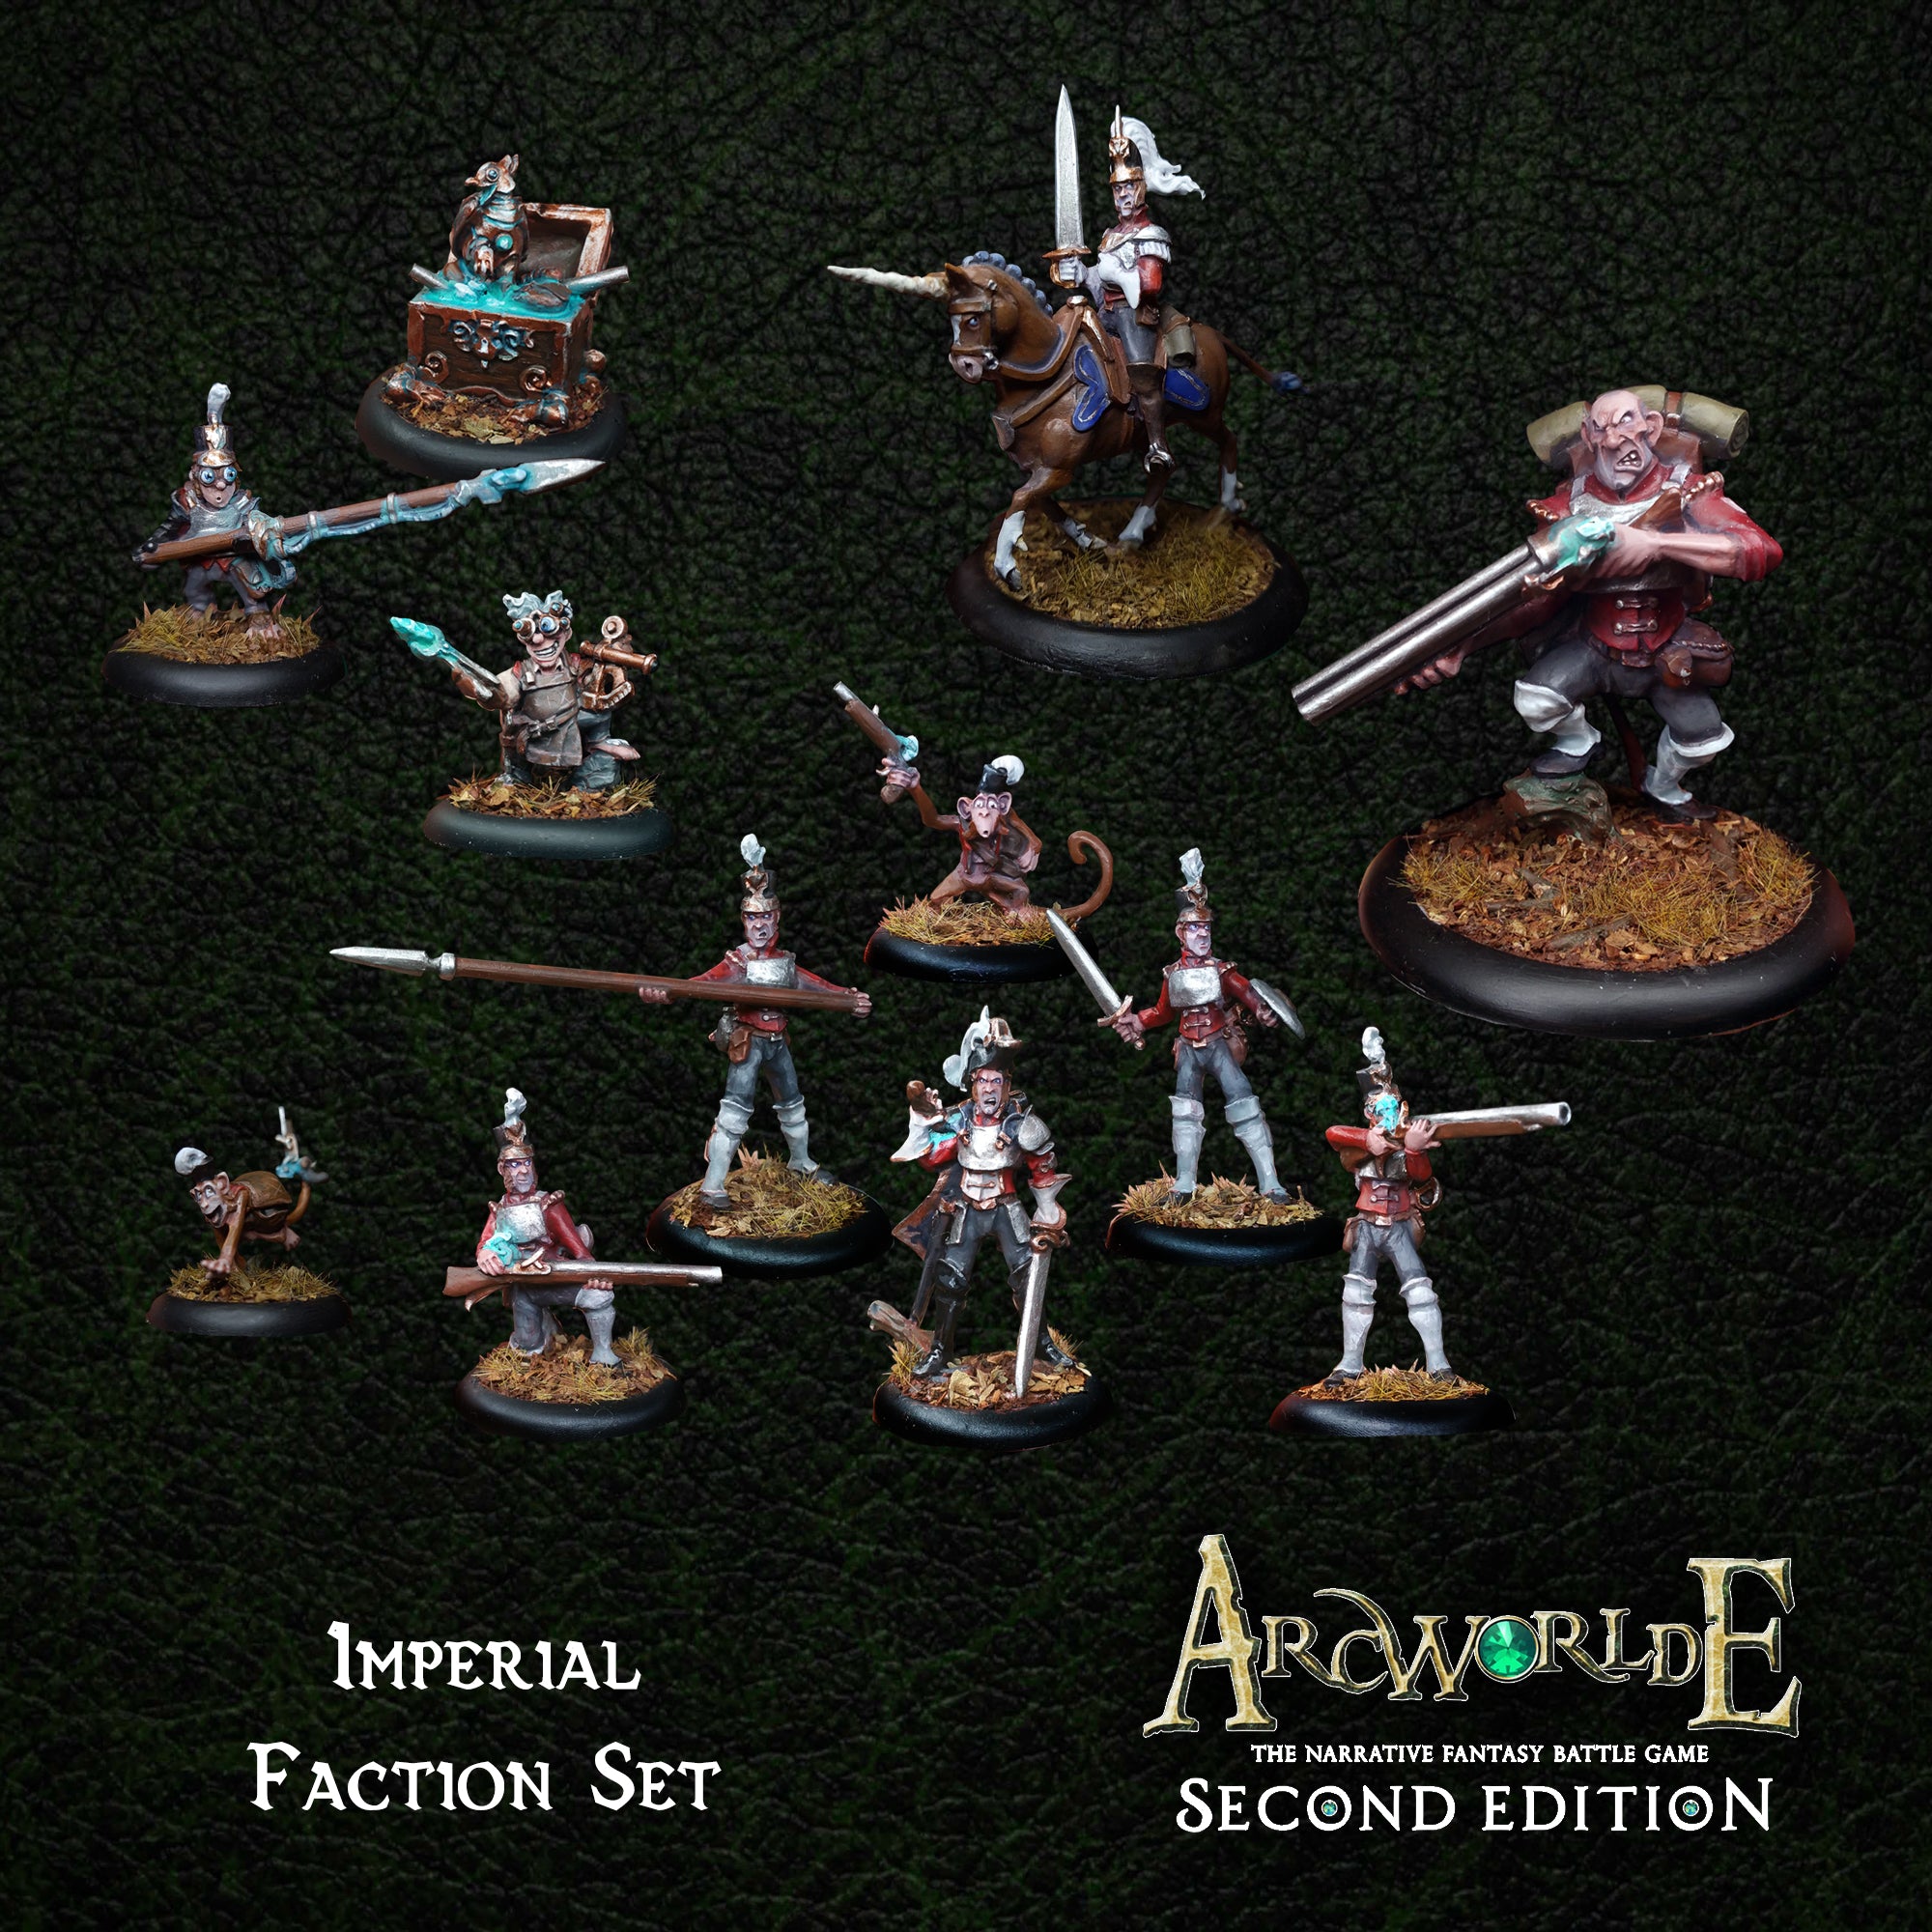 Imperial Faction Set